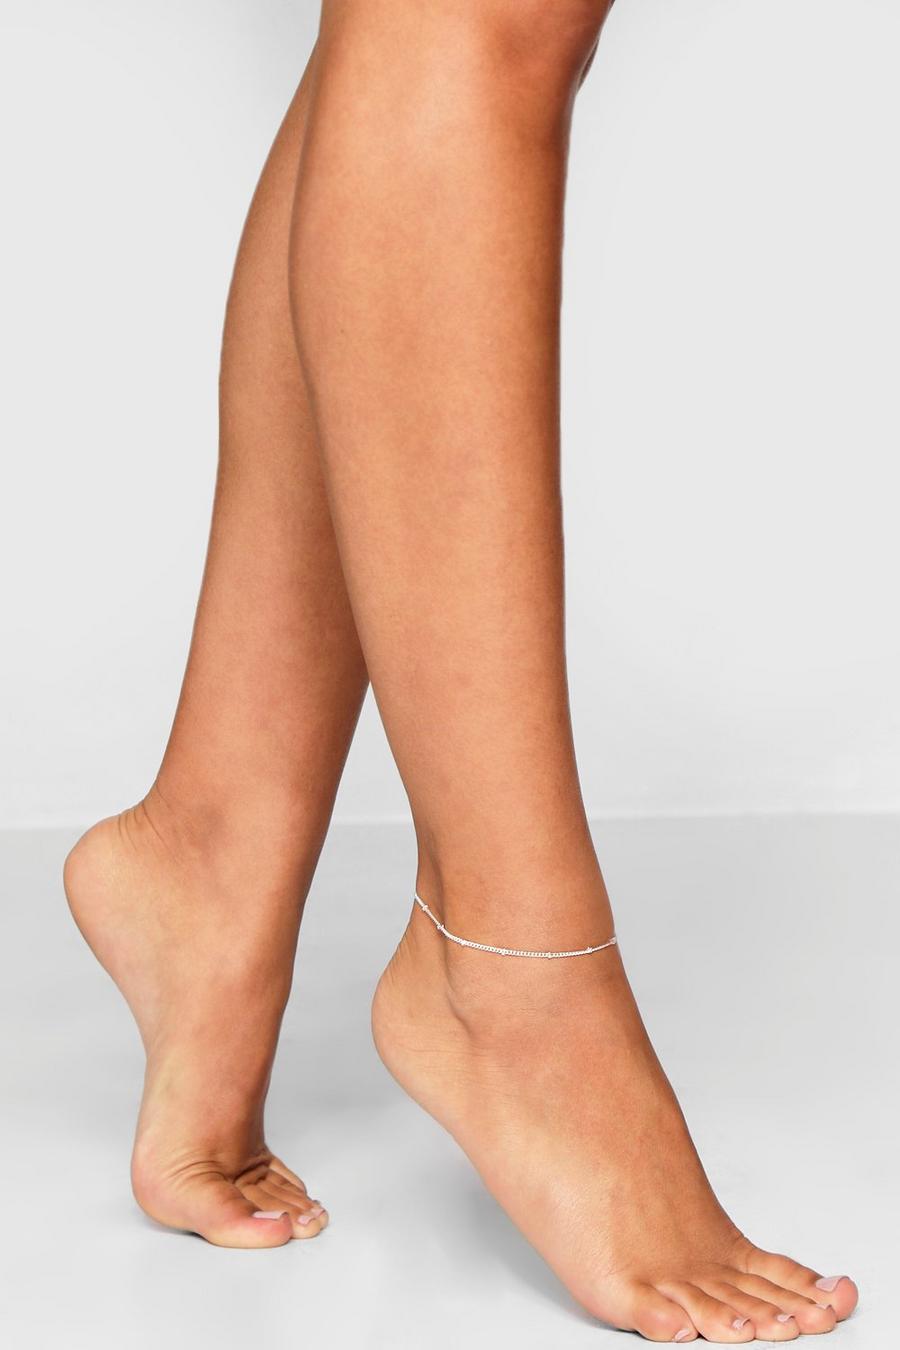 Silver silber Simple Chain Anklet